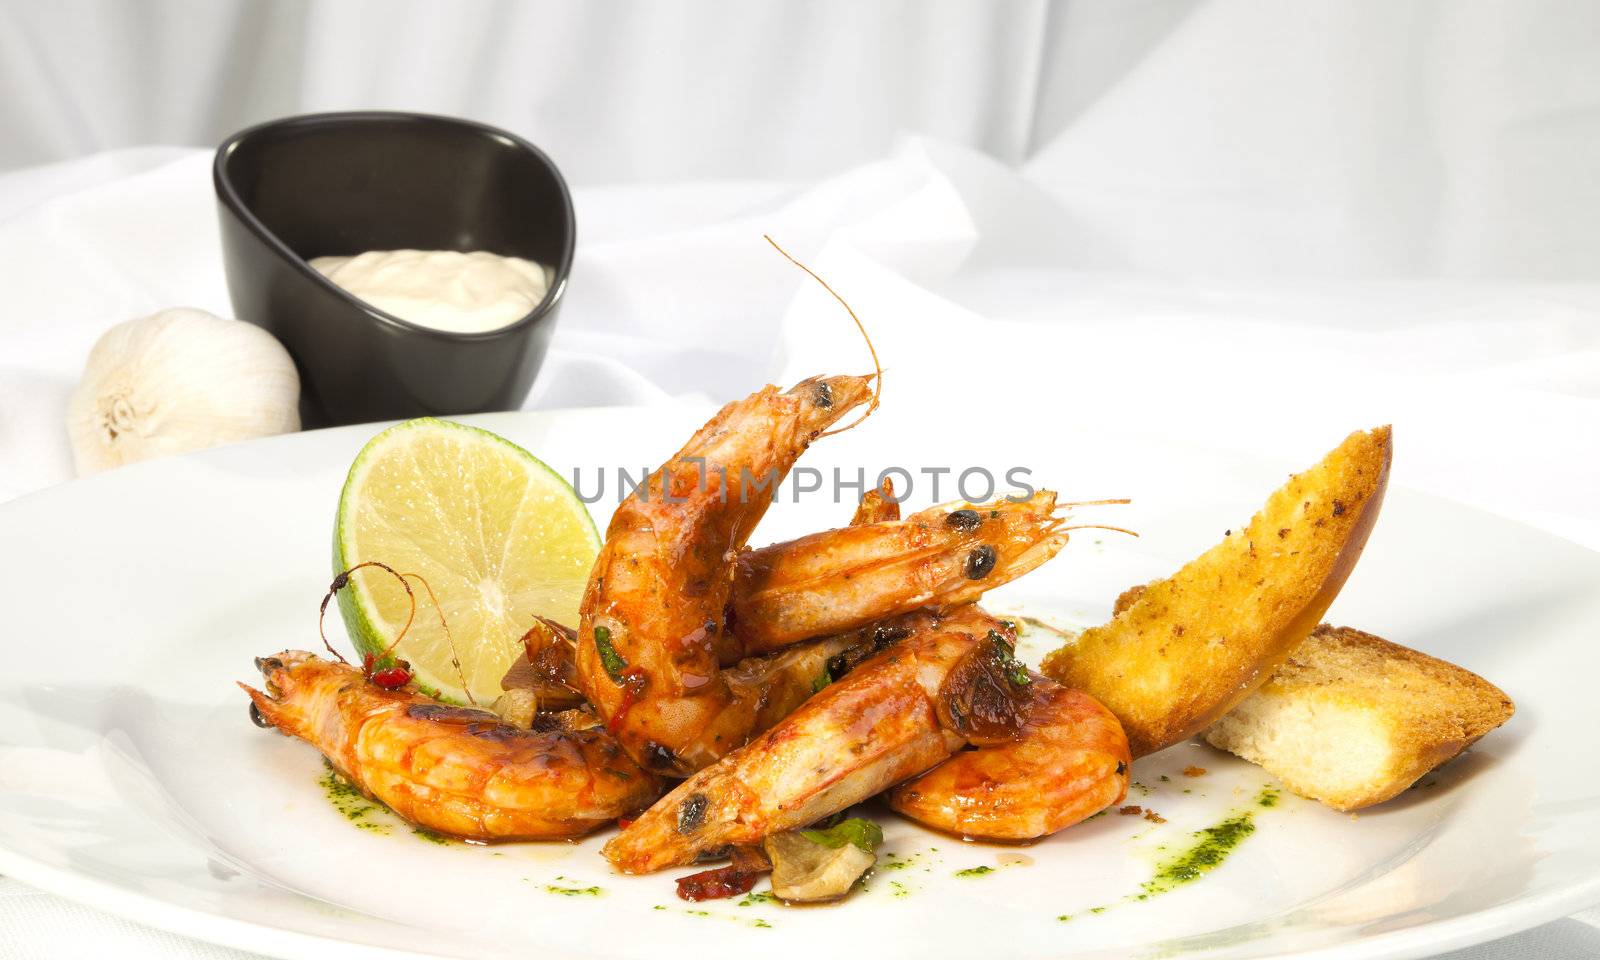 Shrimps prepared with garlic, chilli, white wine and balsamic vi by hanusst